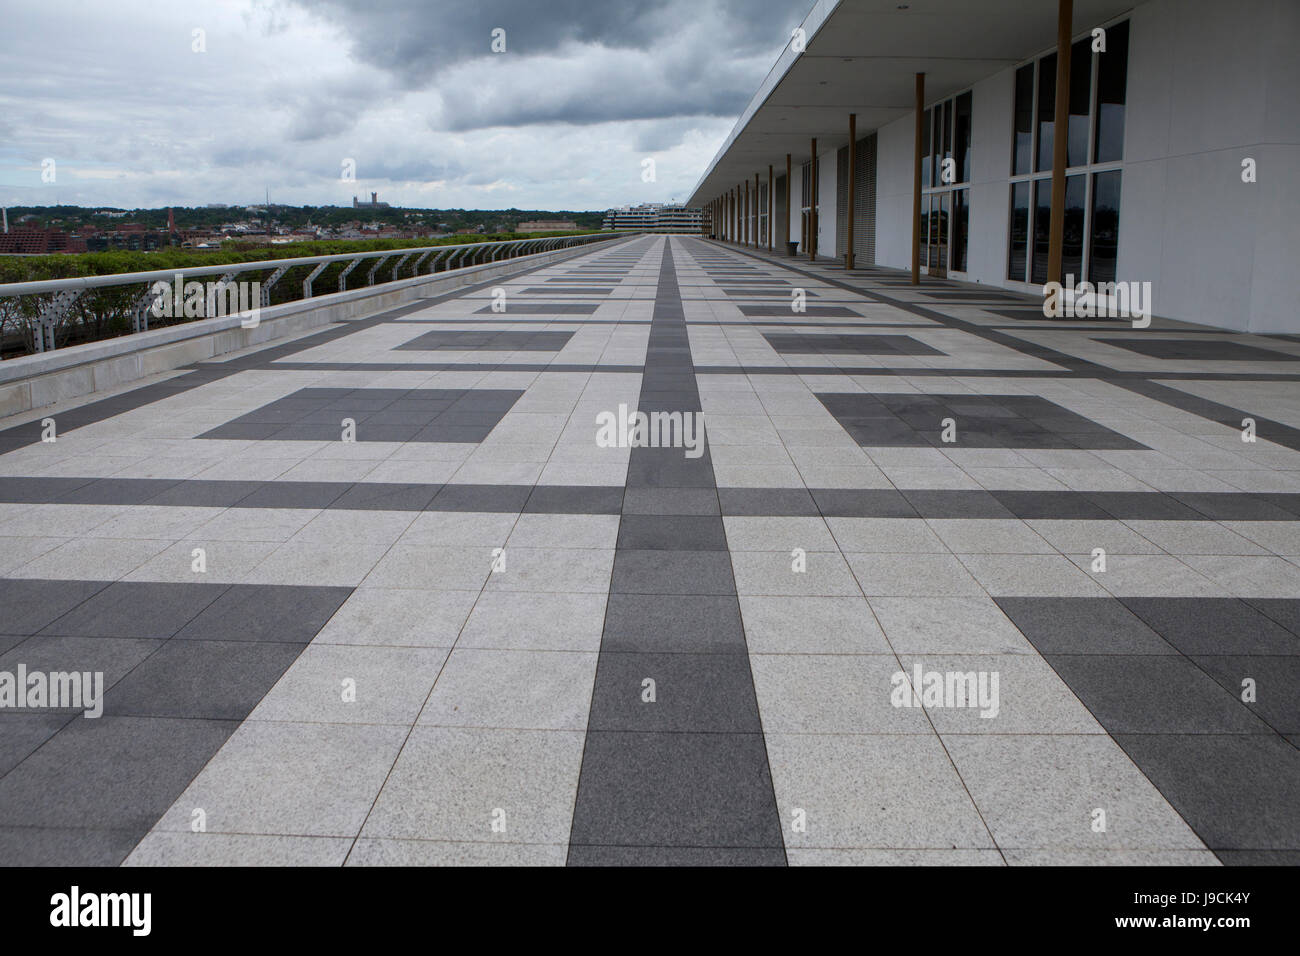 Niveau Terrasse du John F. Kennedy Center for the Performing Arts - Washington, DC USA Banque D'Images